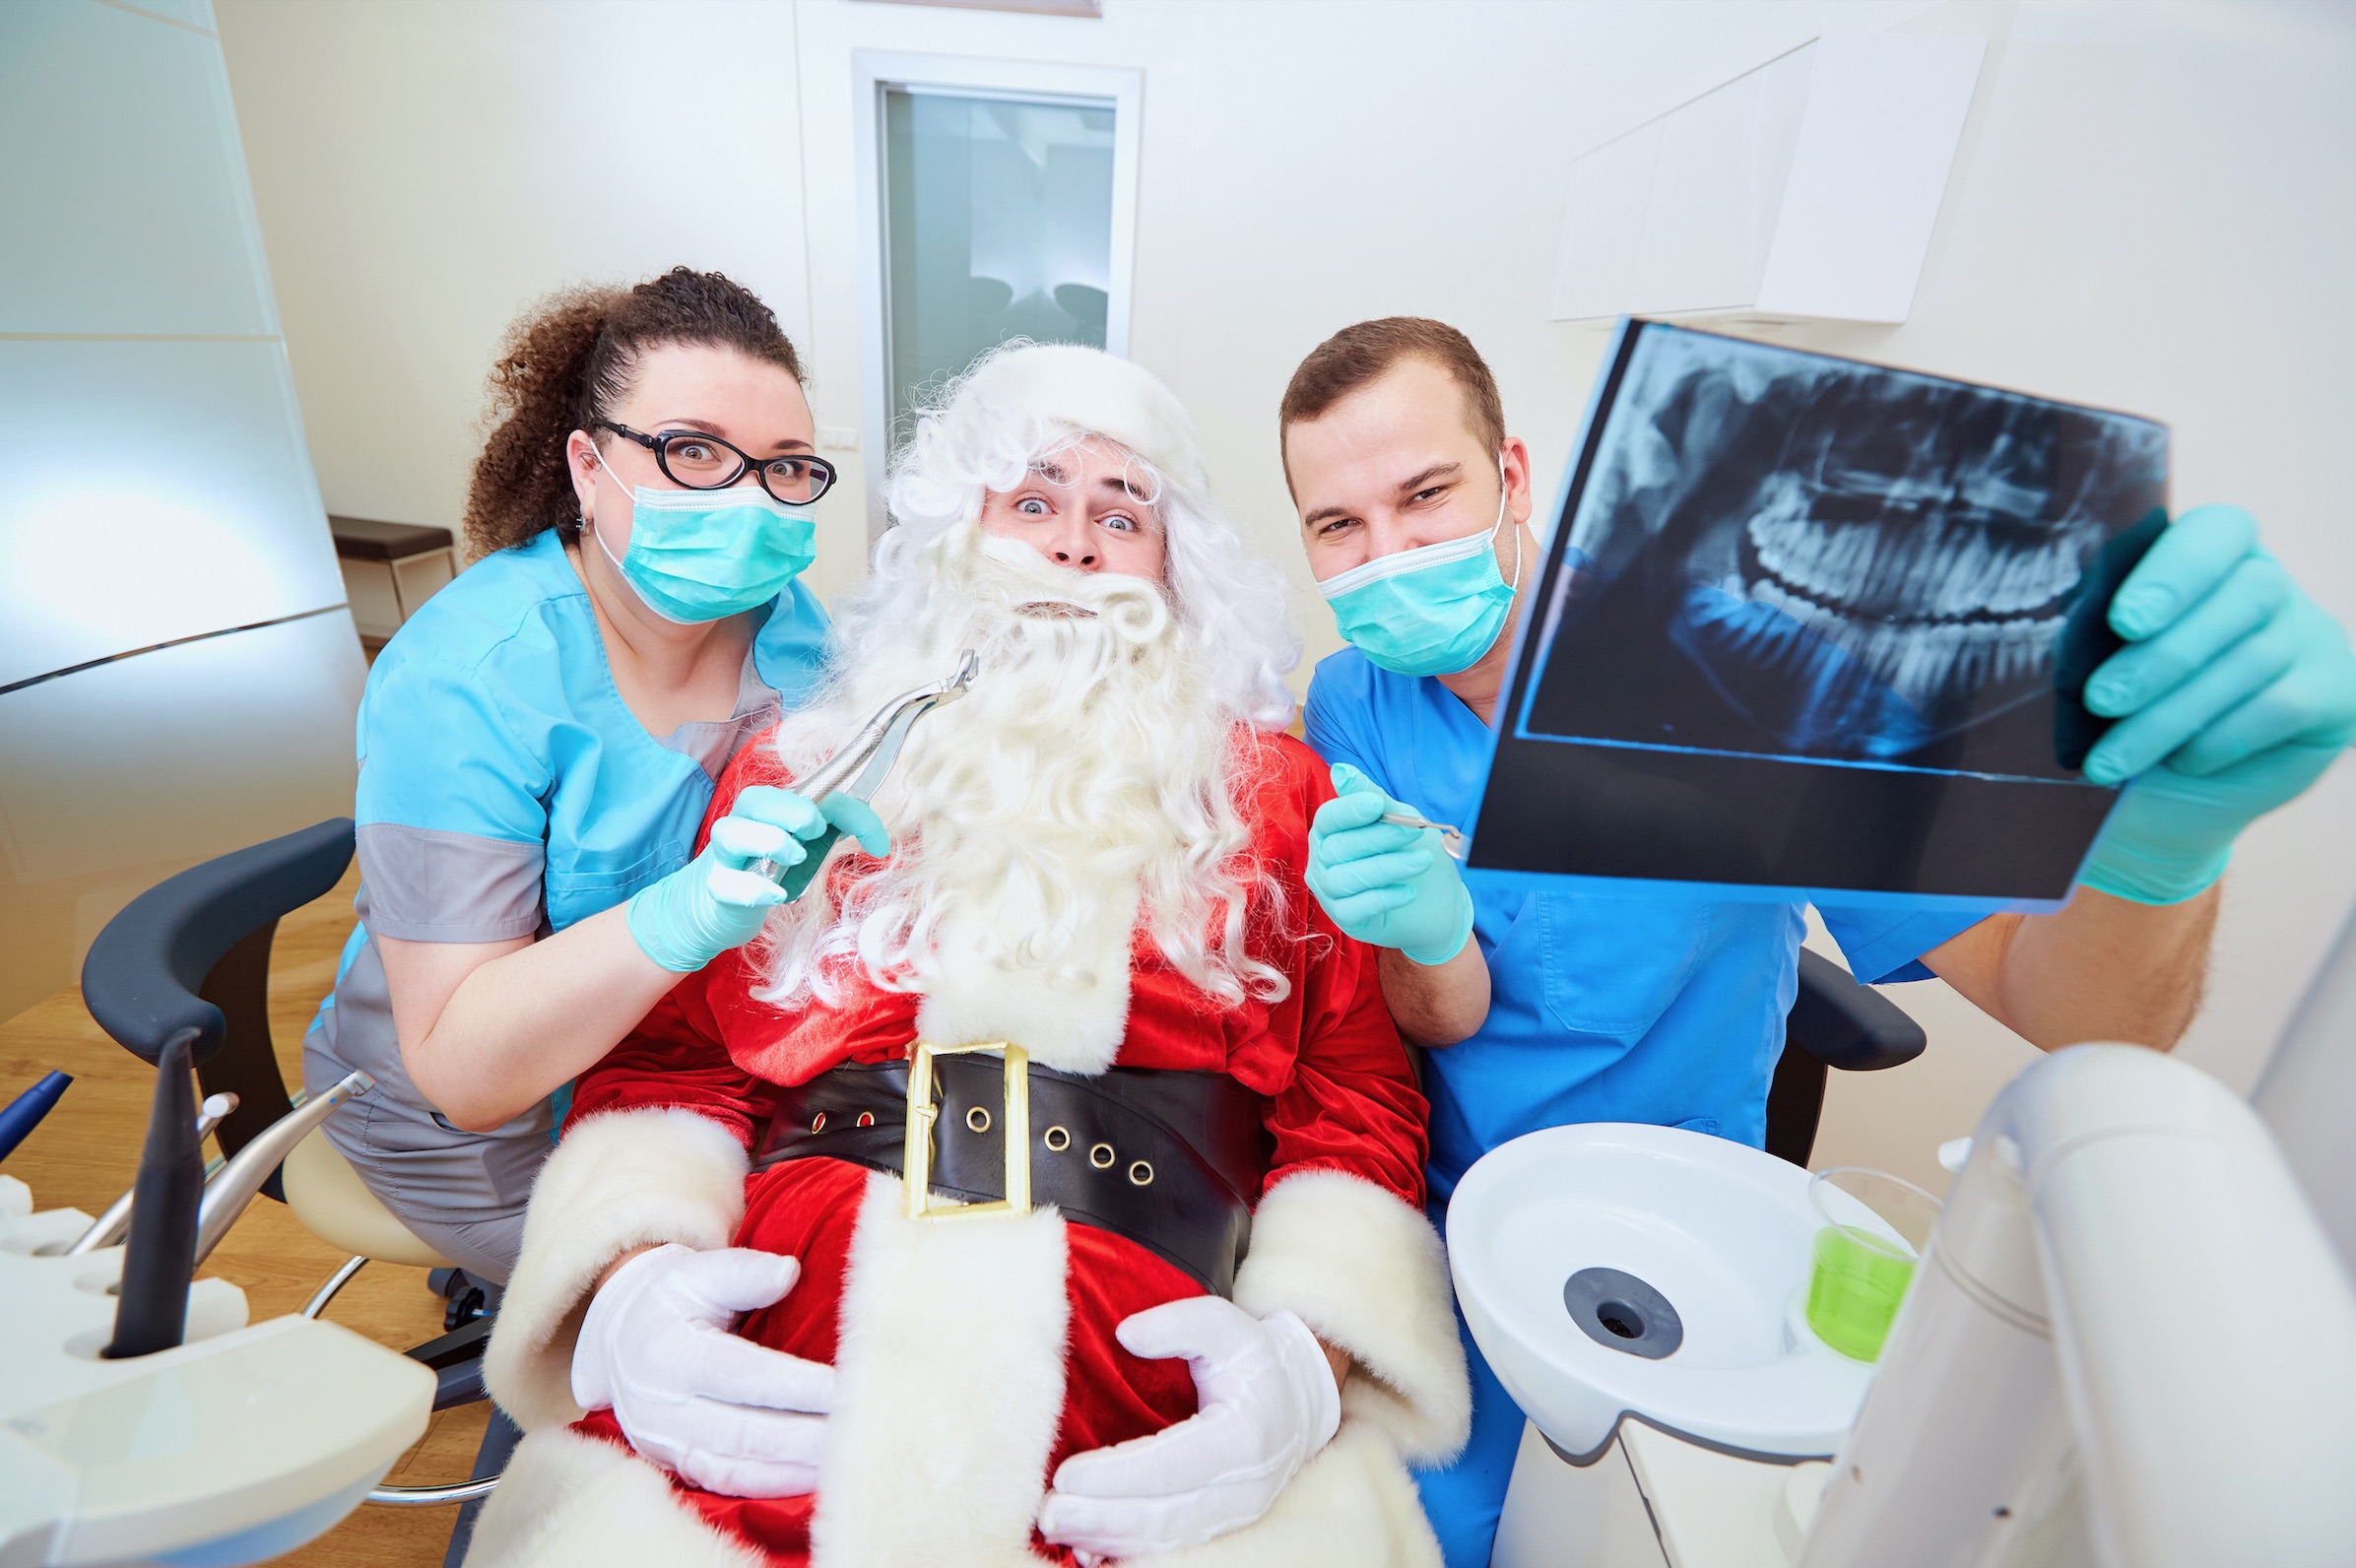 How can I find an emergency dentist over Christmas?